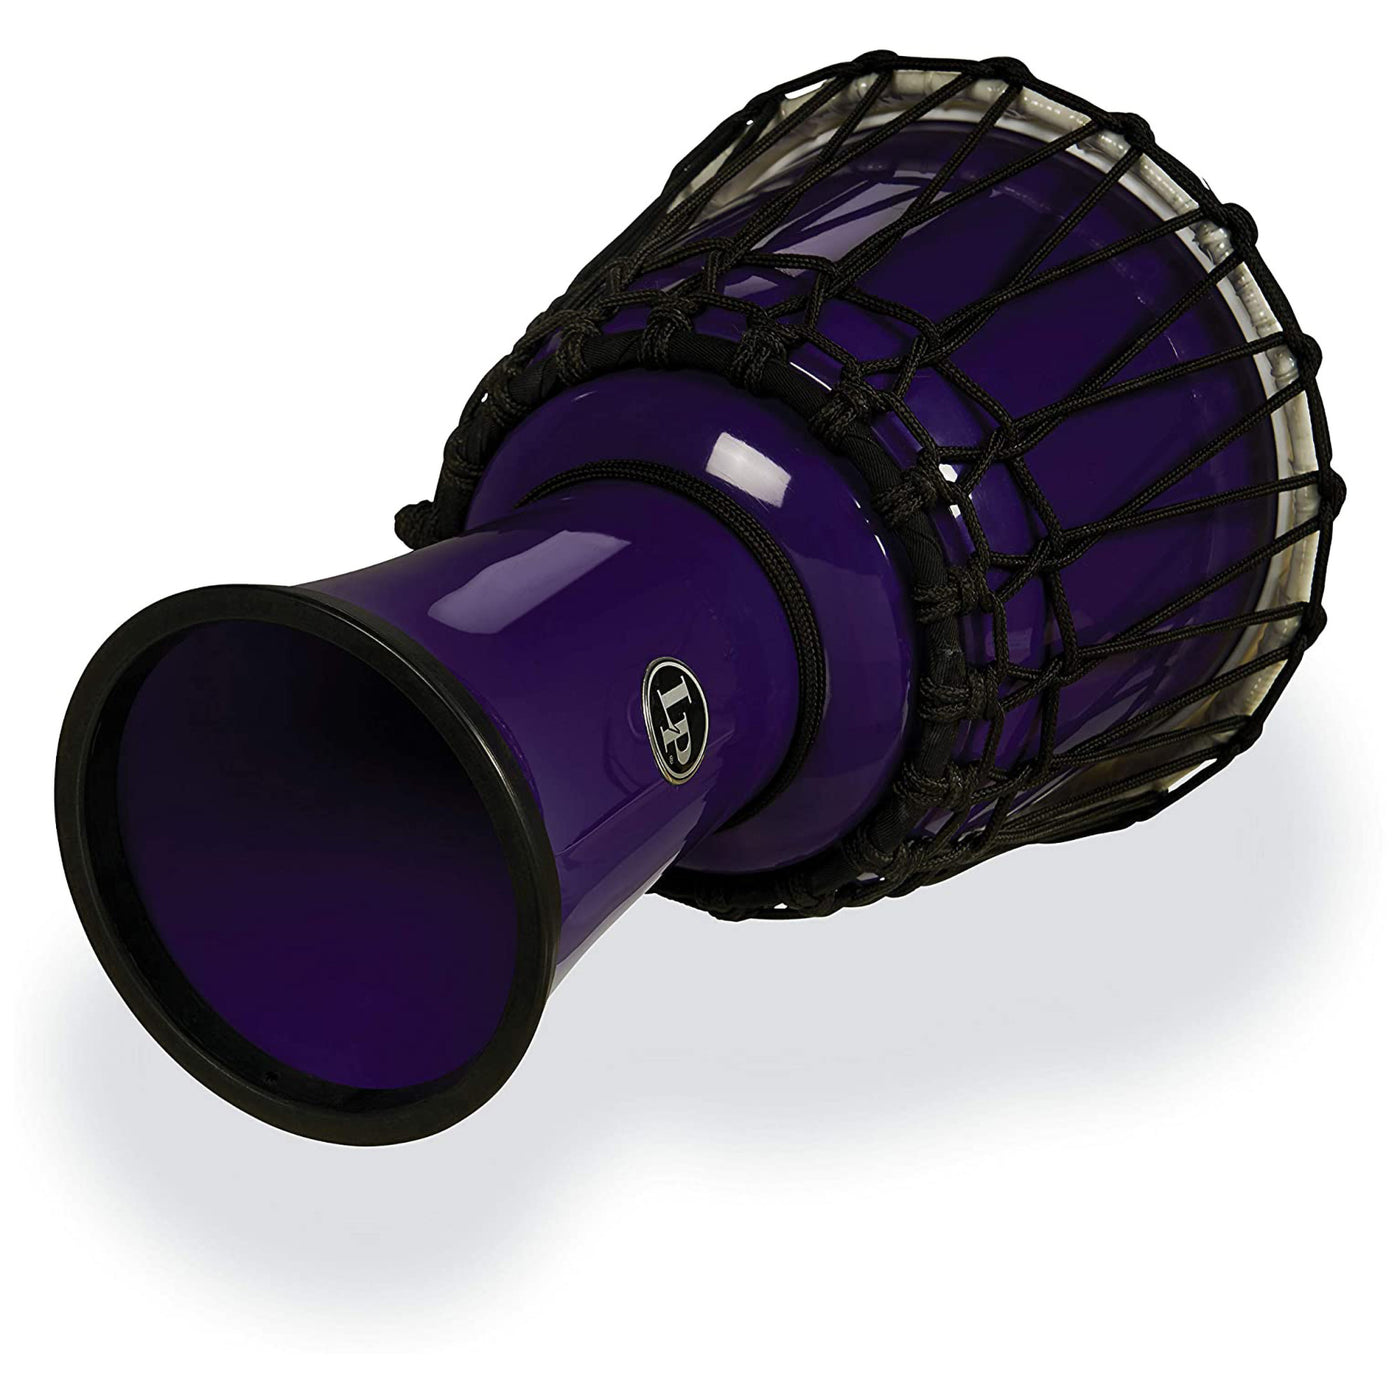 LP World Collection Rope Circle Djembe, 7", Purple